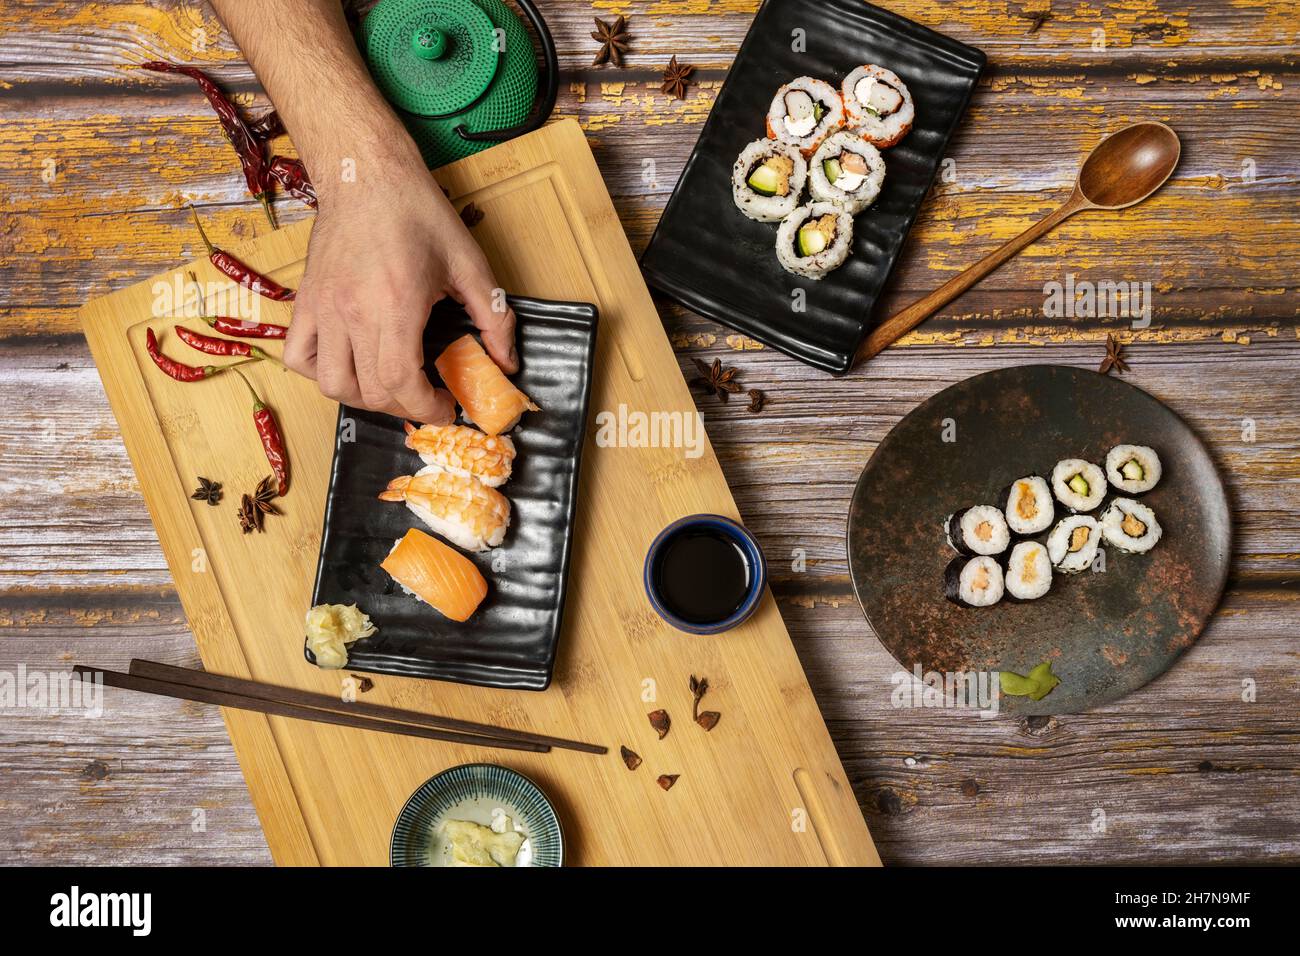 Man's hand holding a piece of Norwegian salmon nigiri sushi from a set of Japanese food dishes with chopsticks and soy sauce Stock Photo